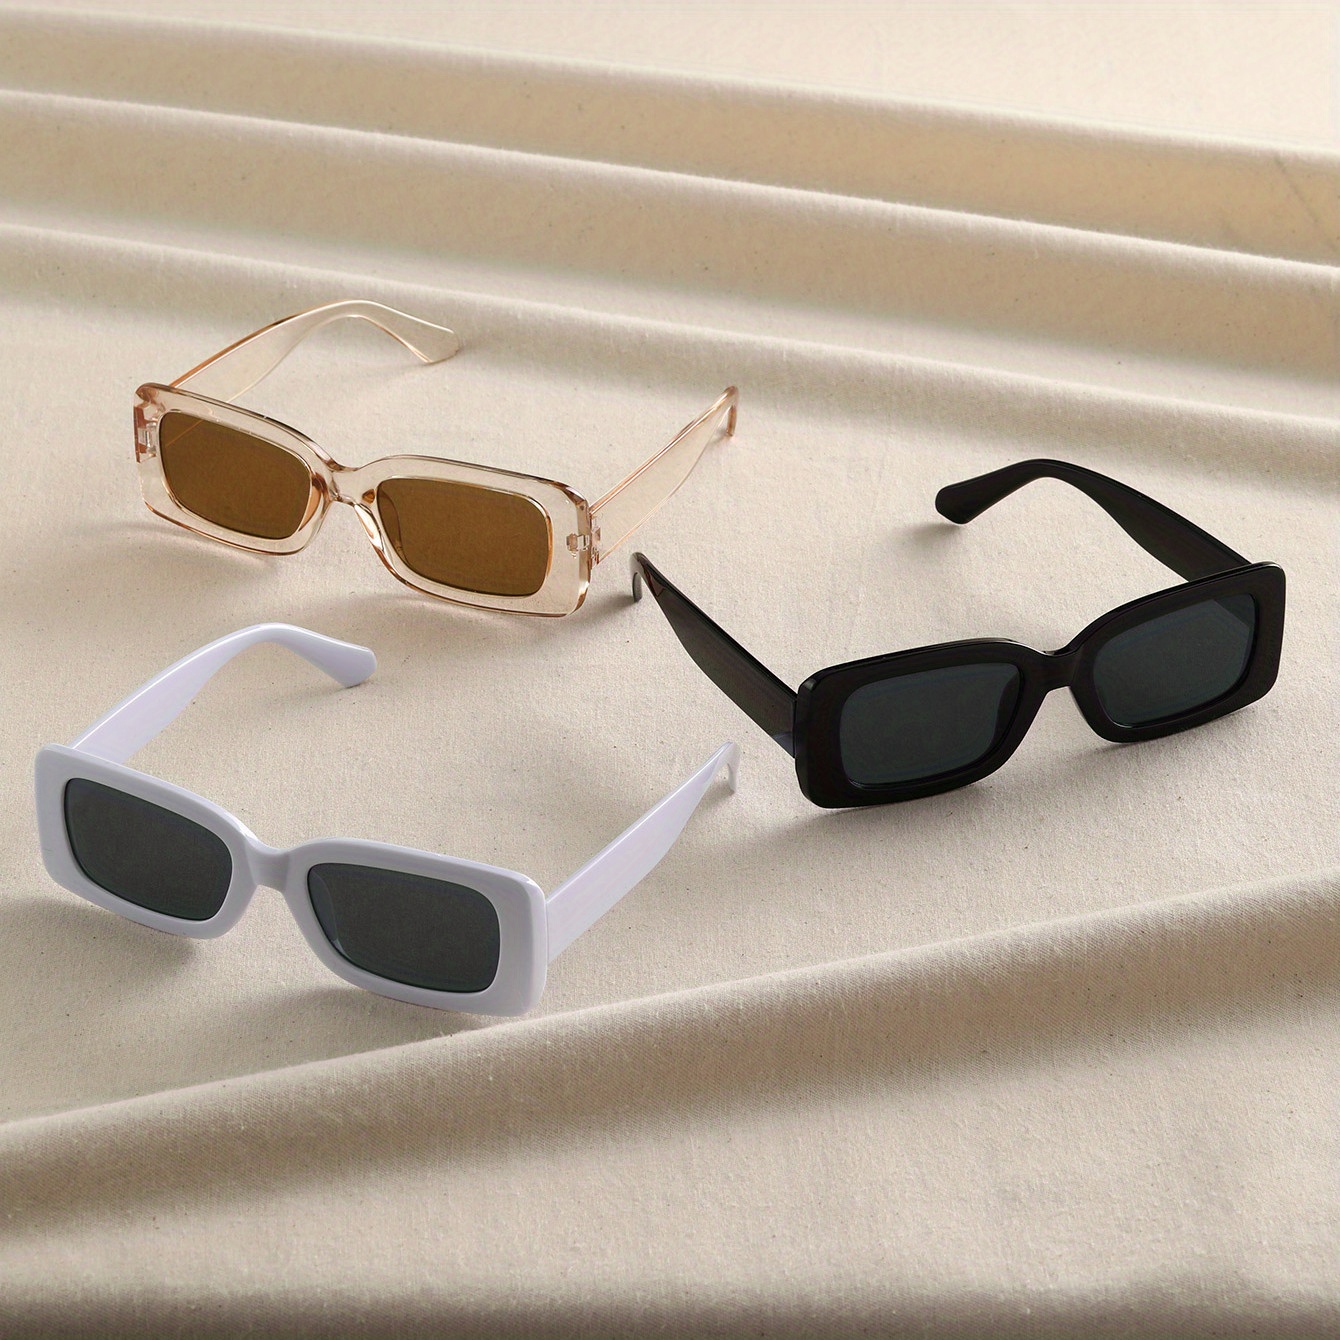 Stylish Beach Glasses For Men And Women Super Cool Yearbook Super